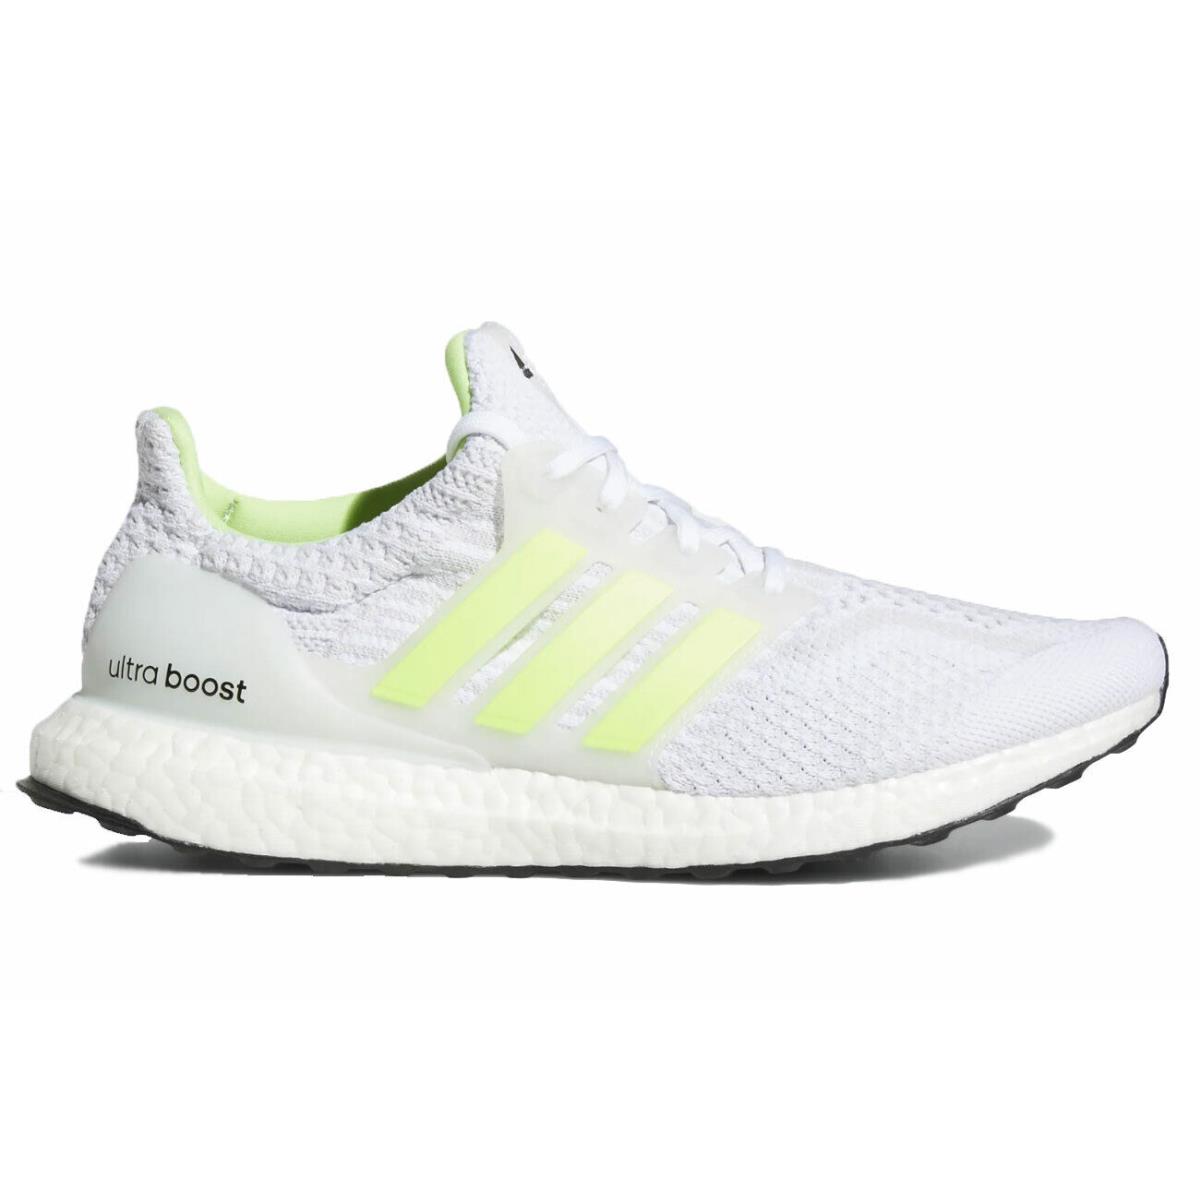 Adidas G58753 Ultraboost 5.0 Dna Cloud White Men`s Casual Running Sneakers